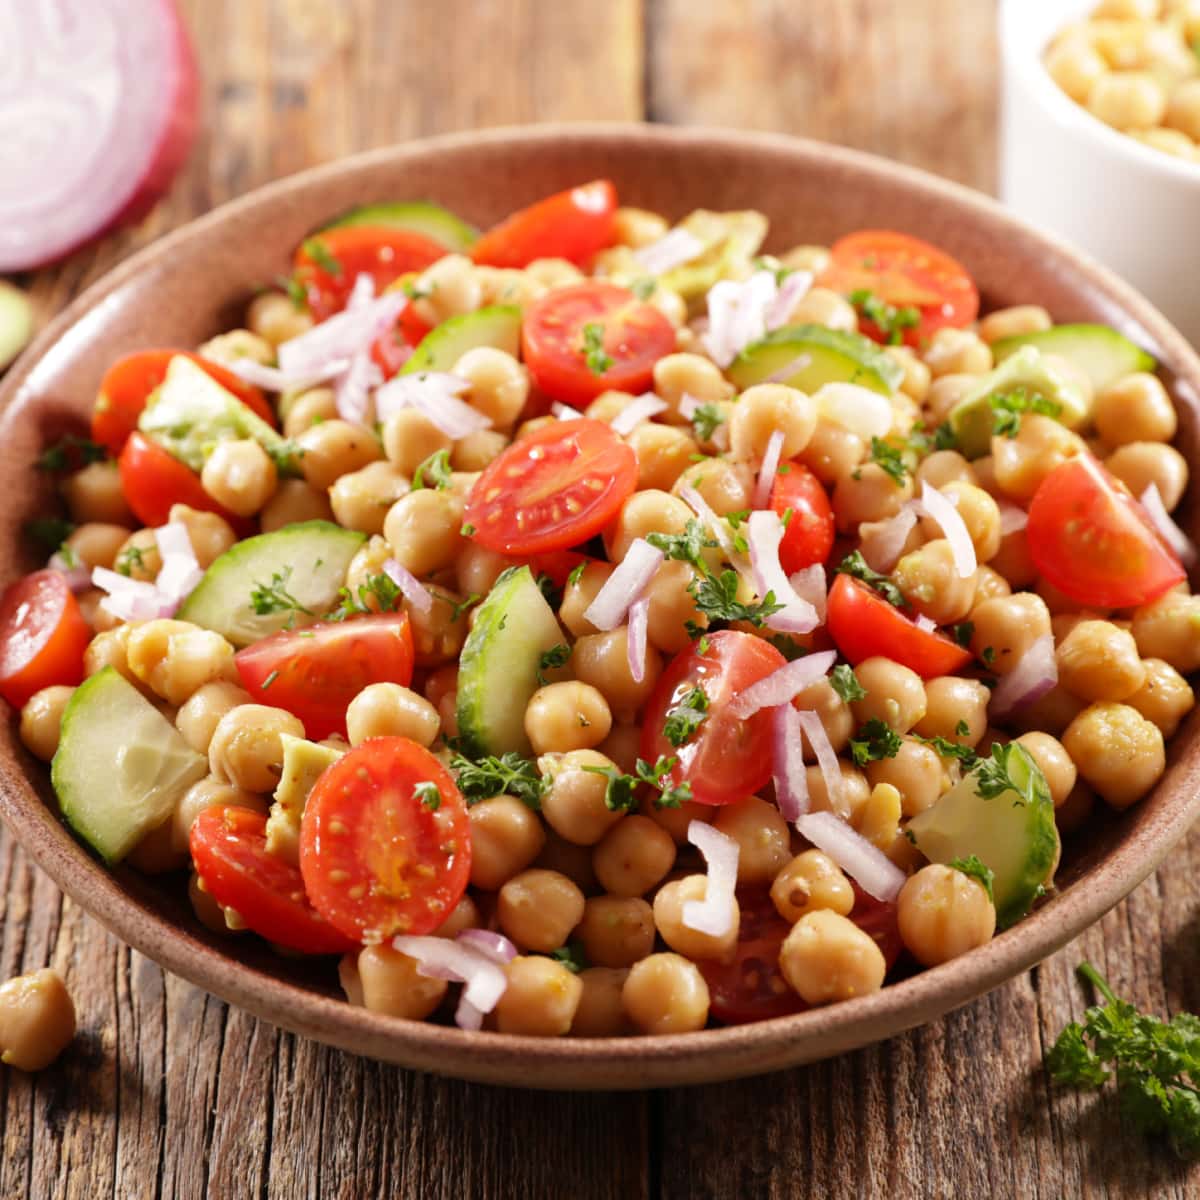 Bowl of chickpea salad with  chickpeas, juicy tomatoes, crunchy cucumbers, creamy avocado garnished with chopped parsley leaves.